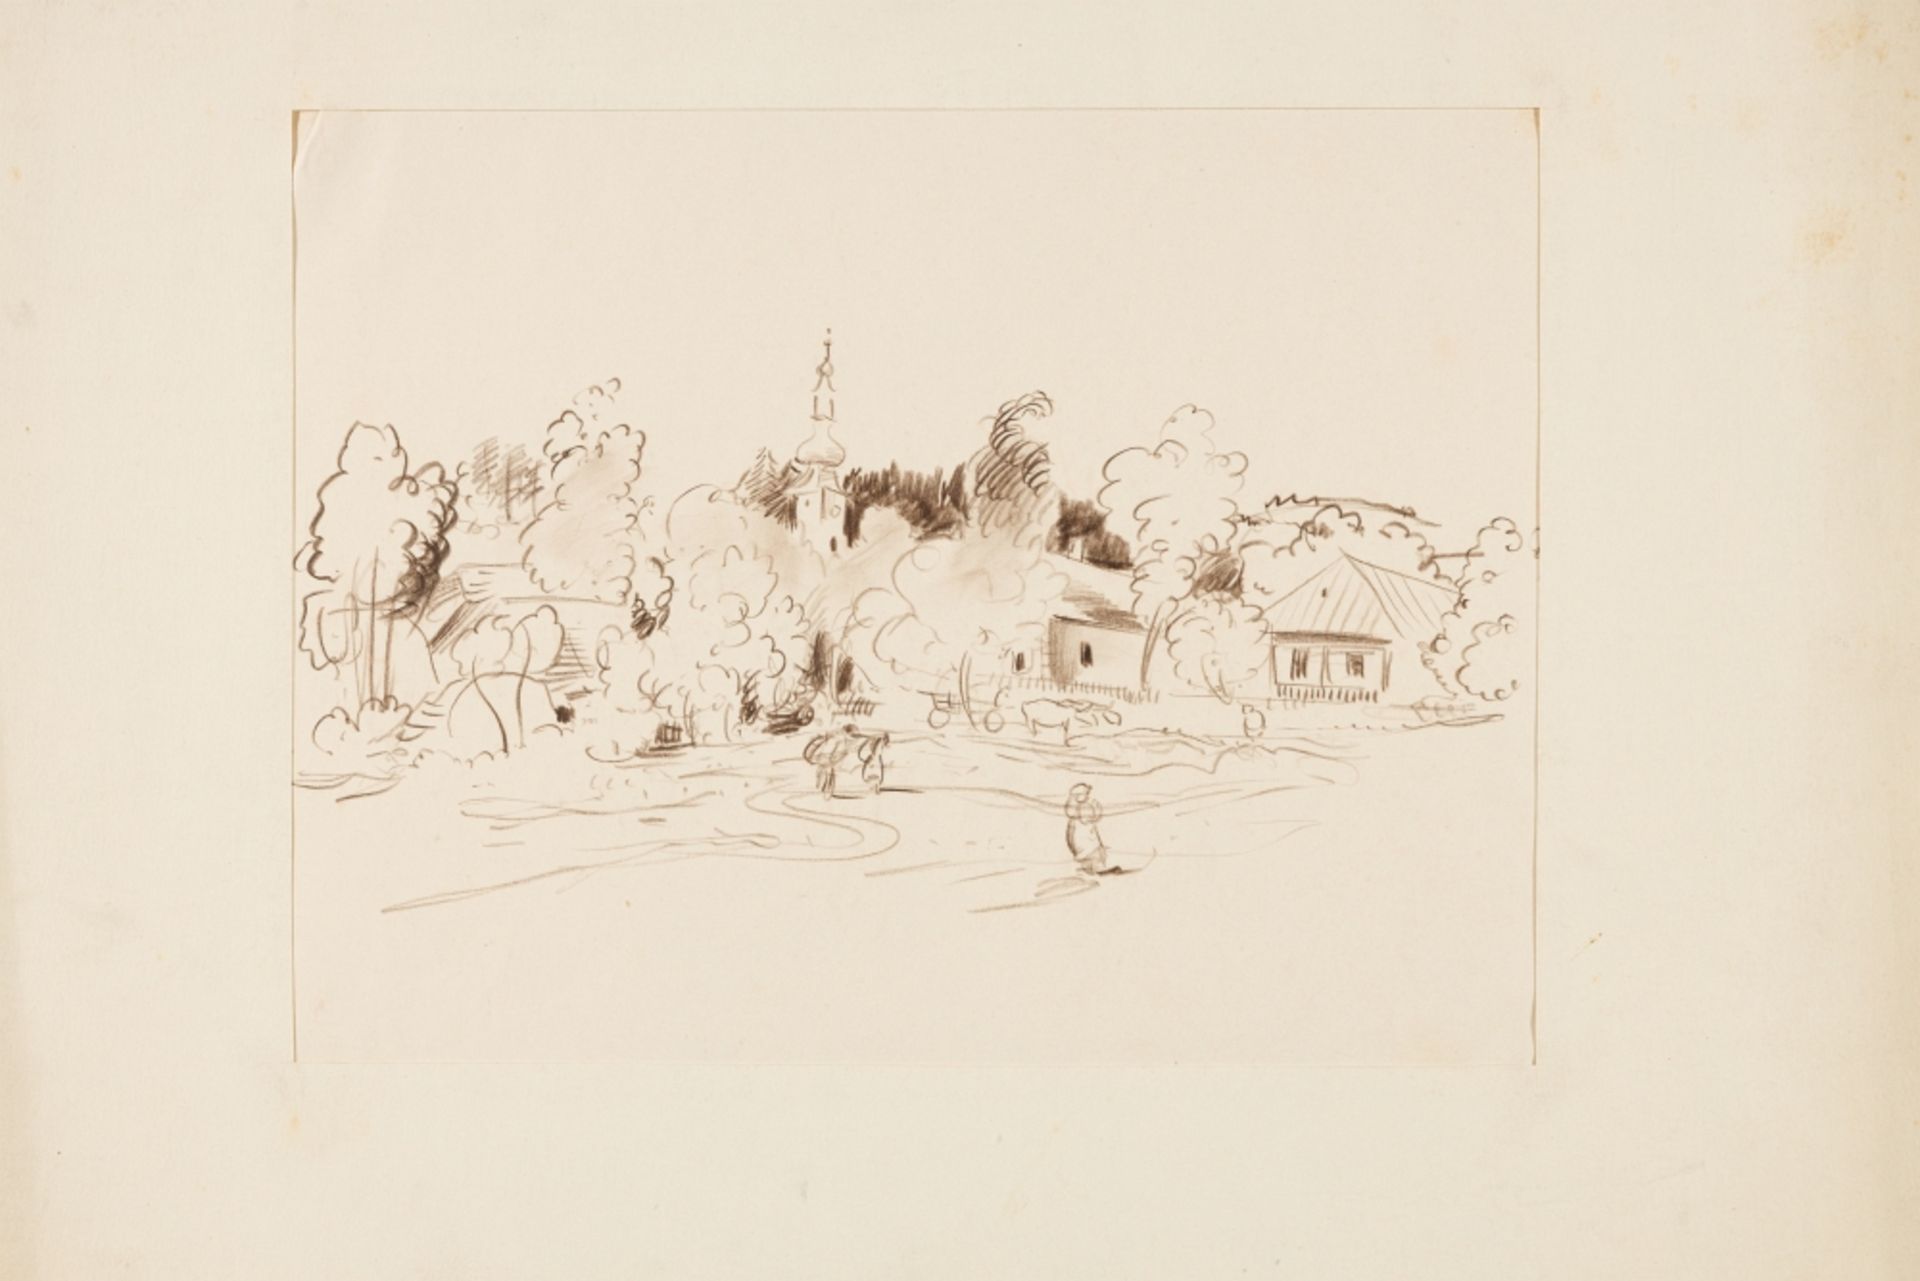 Mayer-Marton, Georg(1897 - 1960)Villagescapebrown charcoal on paper8,8 x 11,4 in - Image 2 of 3